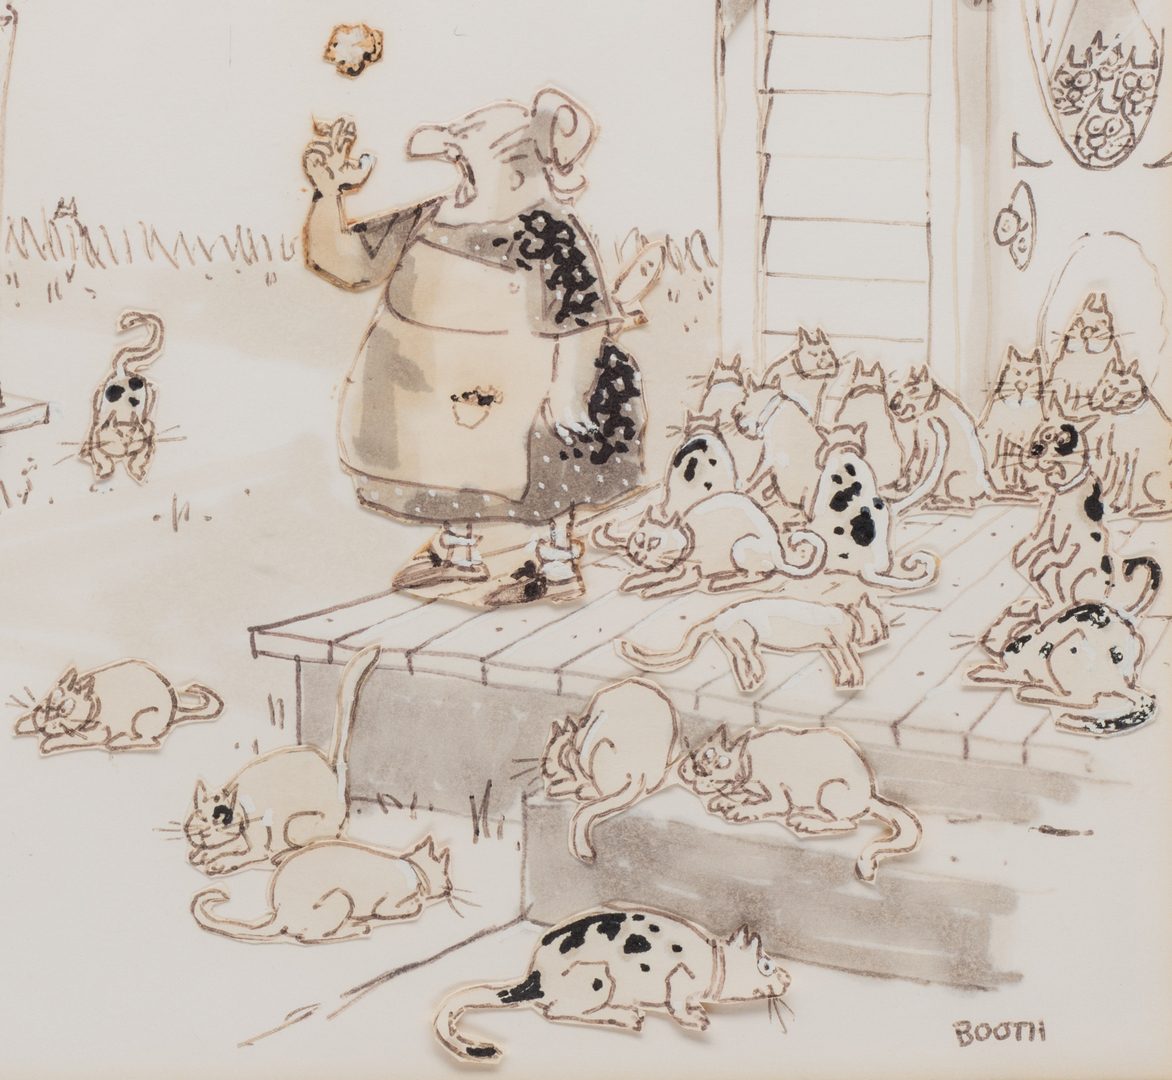 Lot 467: George Booth original illustration for New Yorker, "Let's Swap Some Cats"